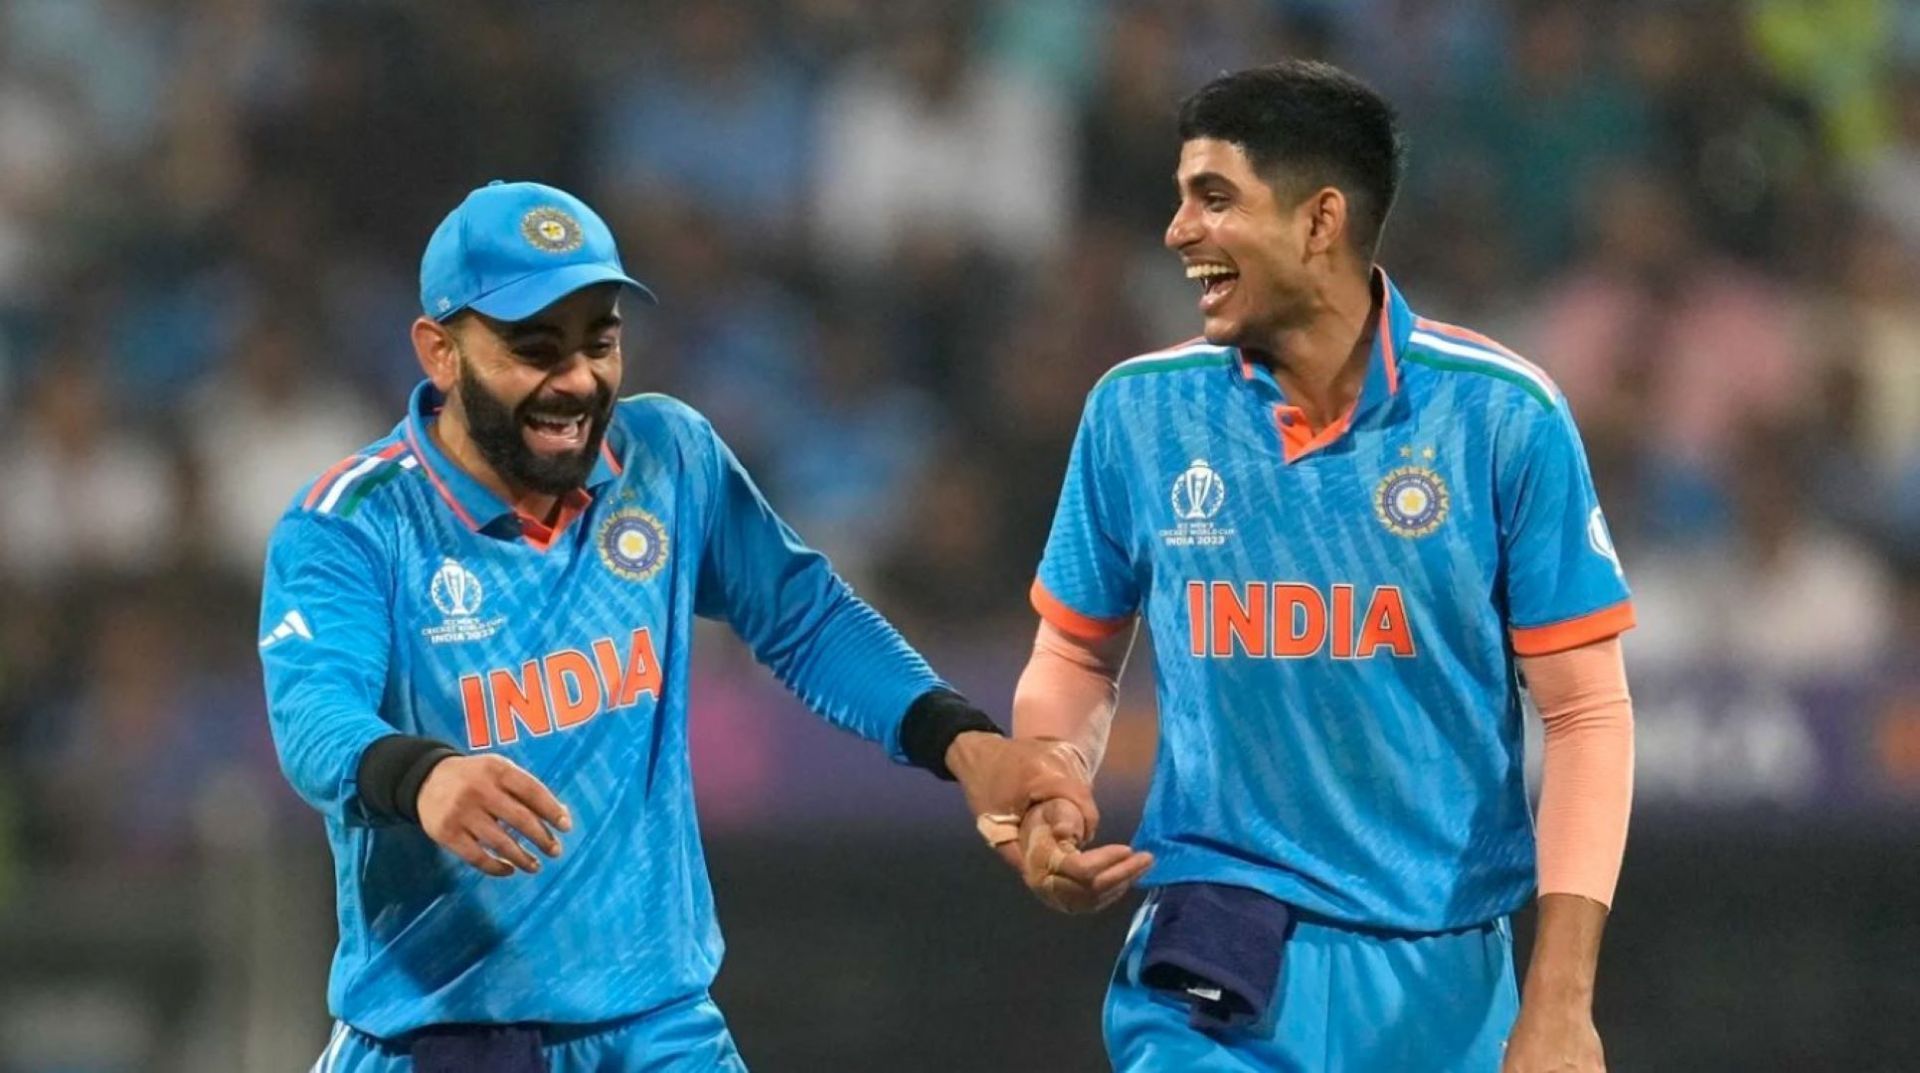 Virat Kohli and Shubman Gill are all smiles on the field after sharing a match-winning partnership.